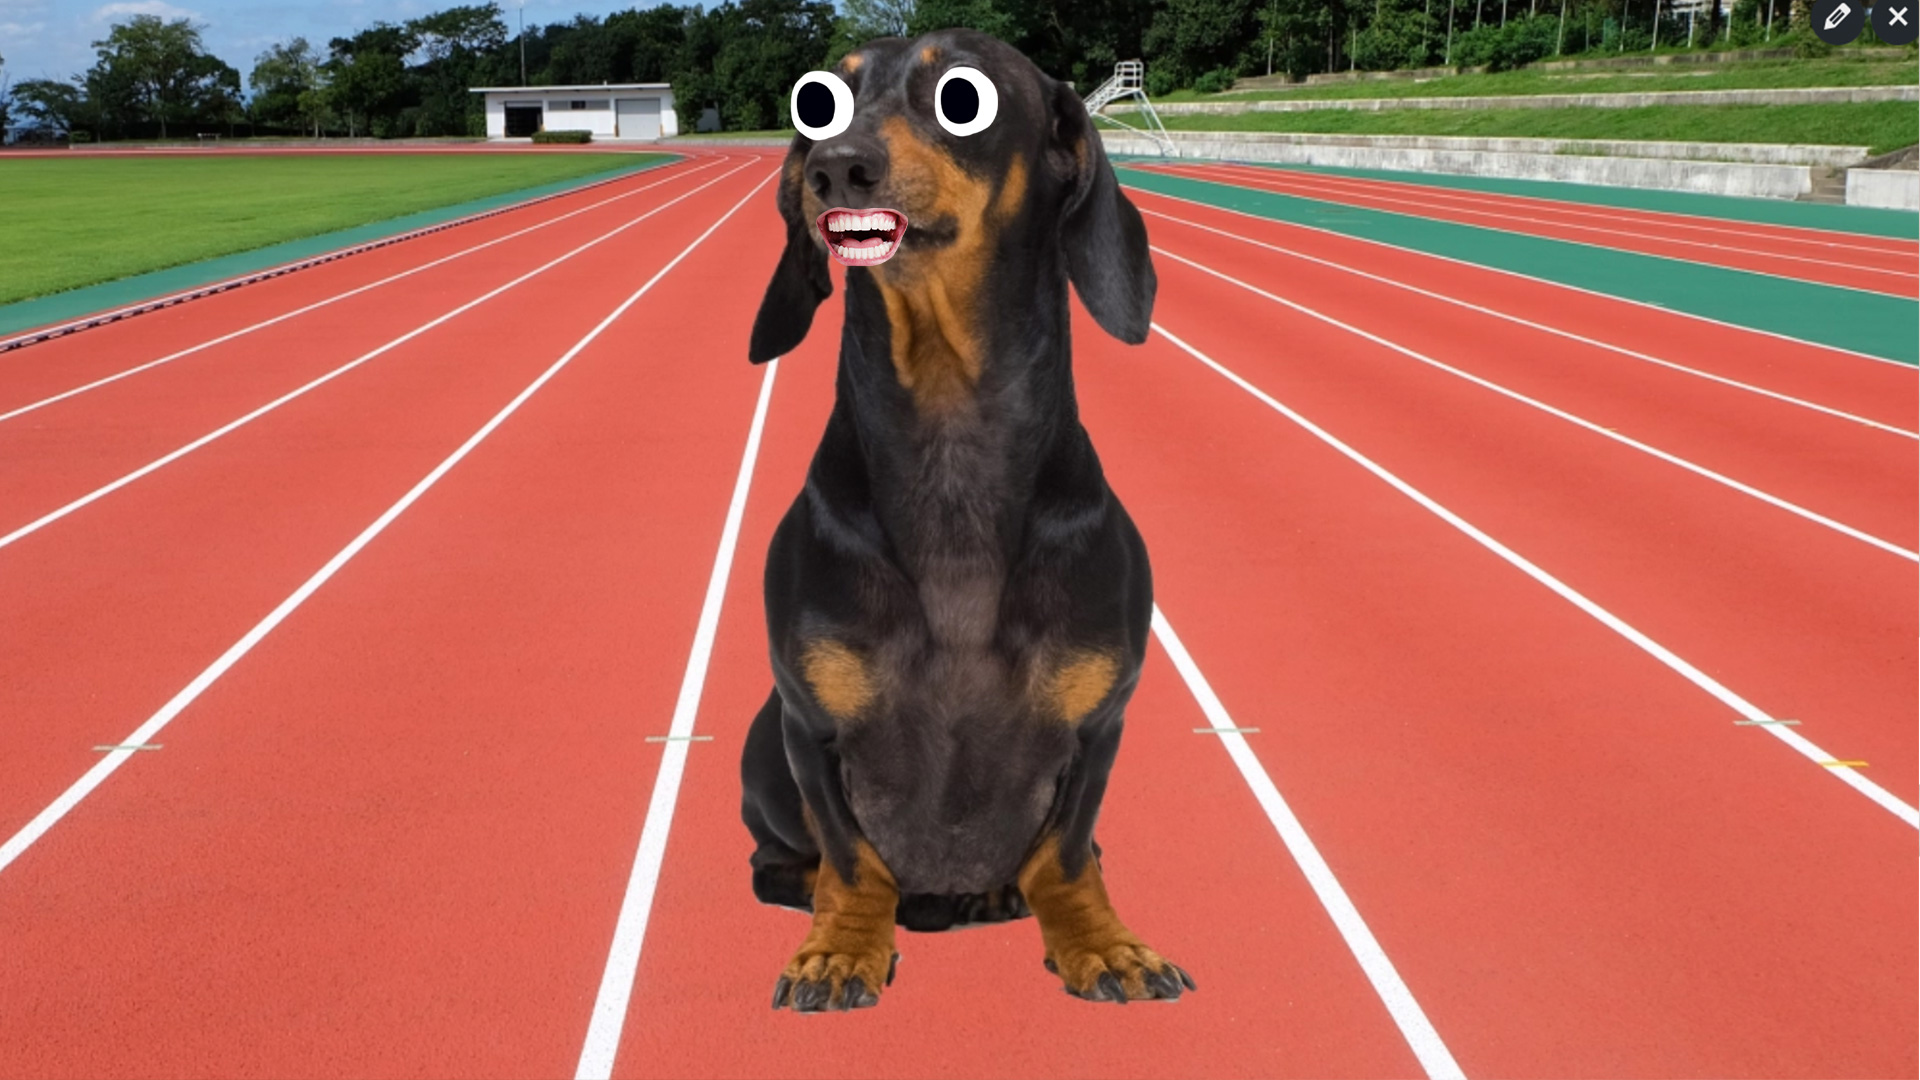 A dog on a running track